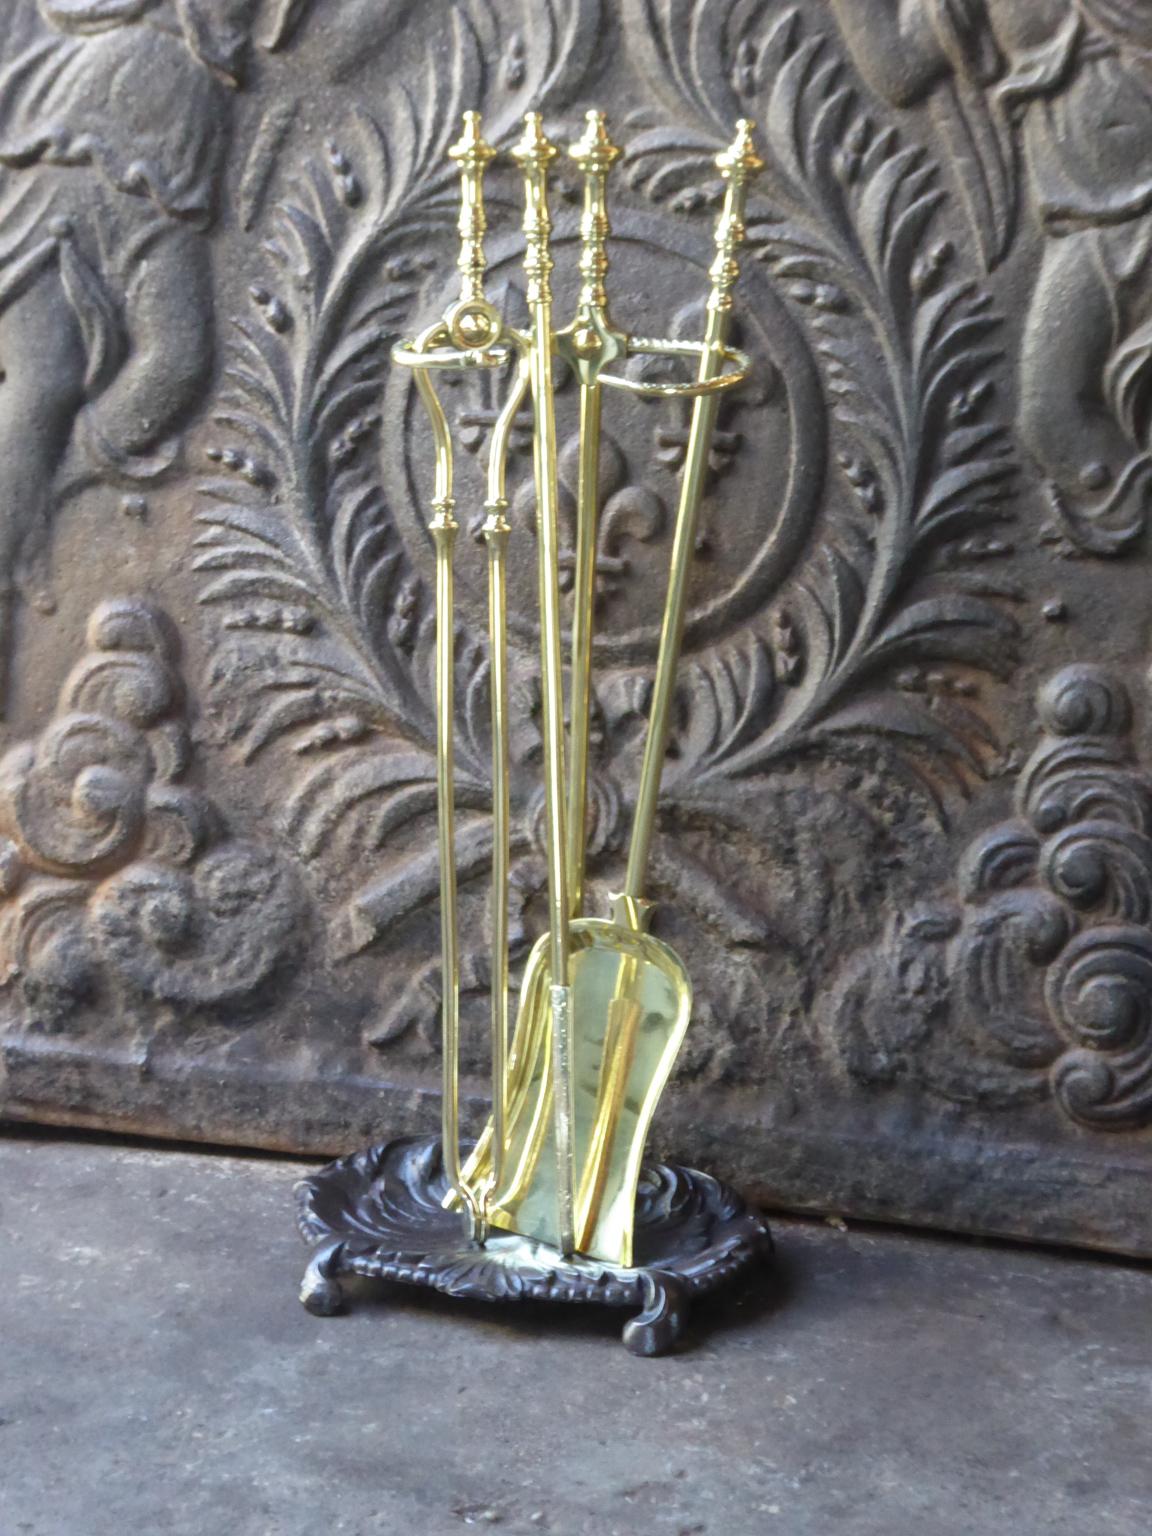 English set of three polished brass fireplace tools with a stand made of polished brass and cast iron. The fire tool set is in a good condition and is fully functional. 19th century, Victorian.